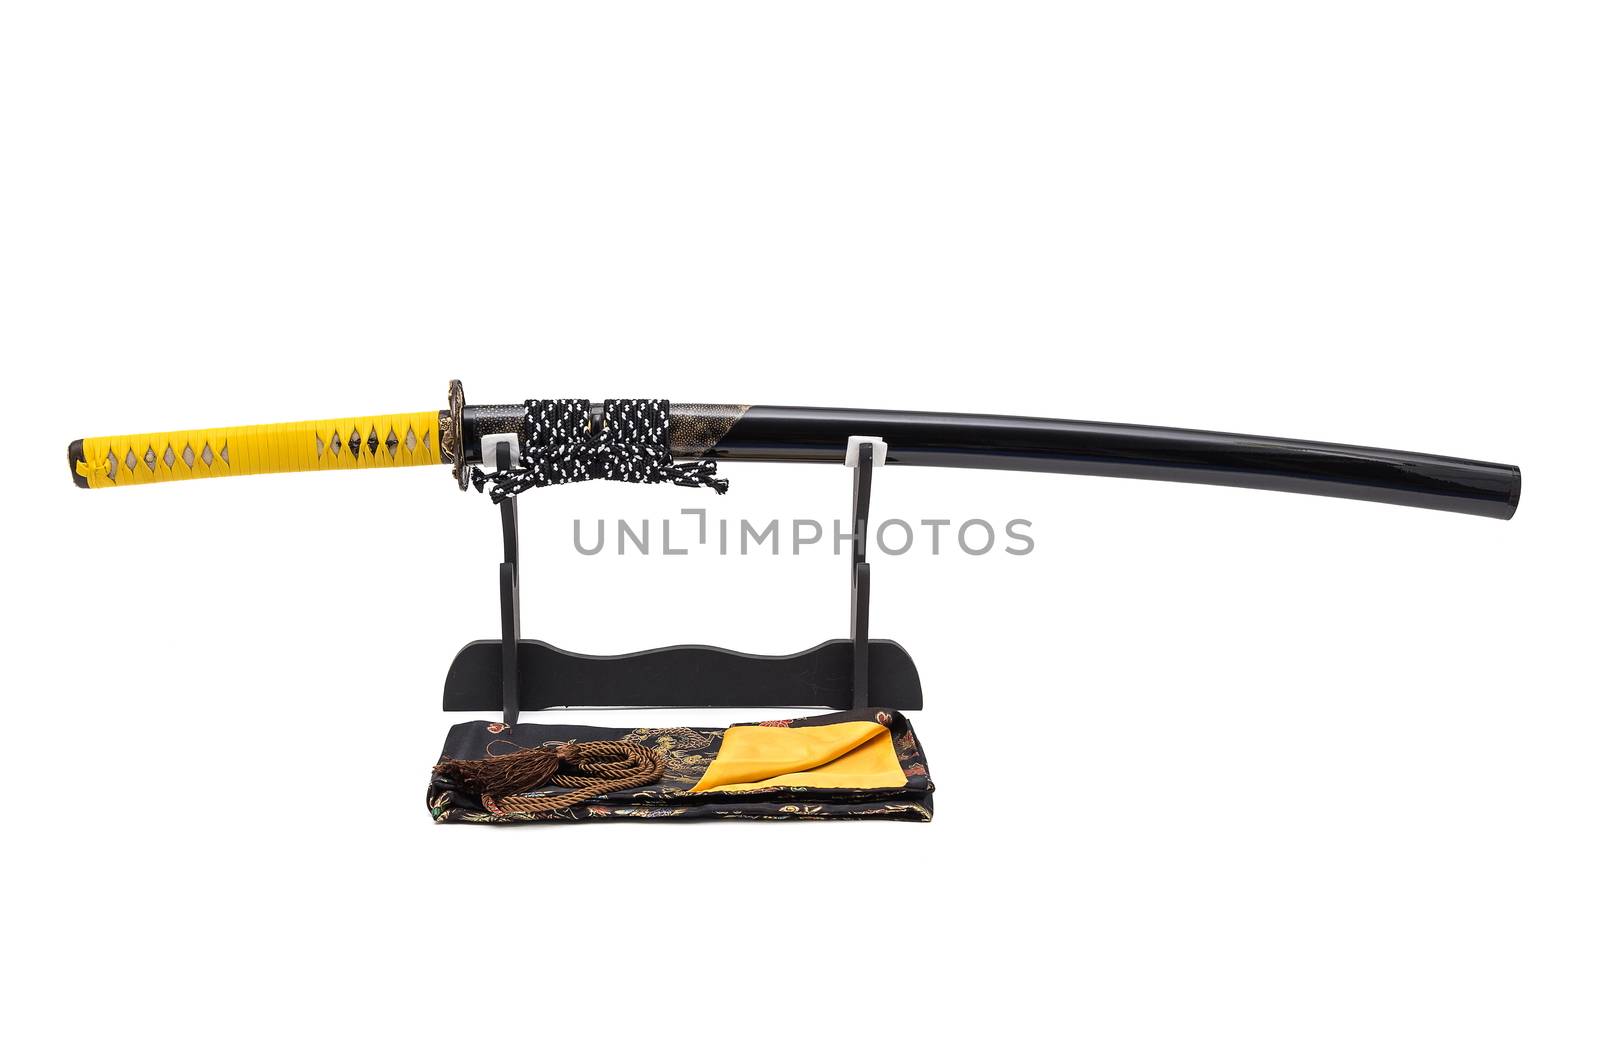 Japanese sword with yellow leather cord wrapped on handle and scabbard with ray skin on stand  white background, black silk bag at front.